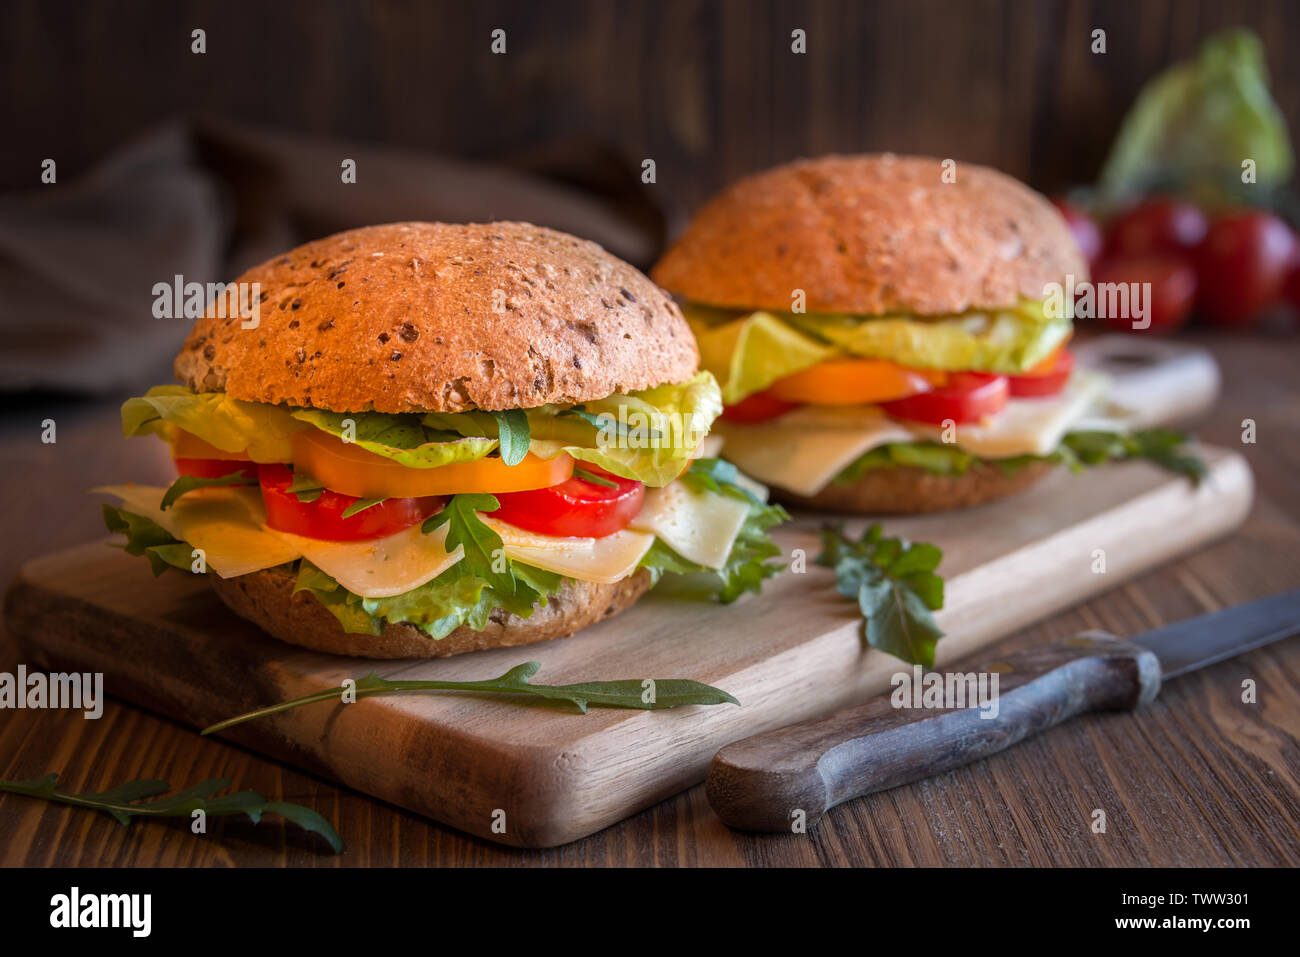 Vegetarian sandwiches with cheese, lettuce, vegetables and arugola on dark background Stock Photo